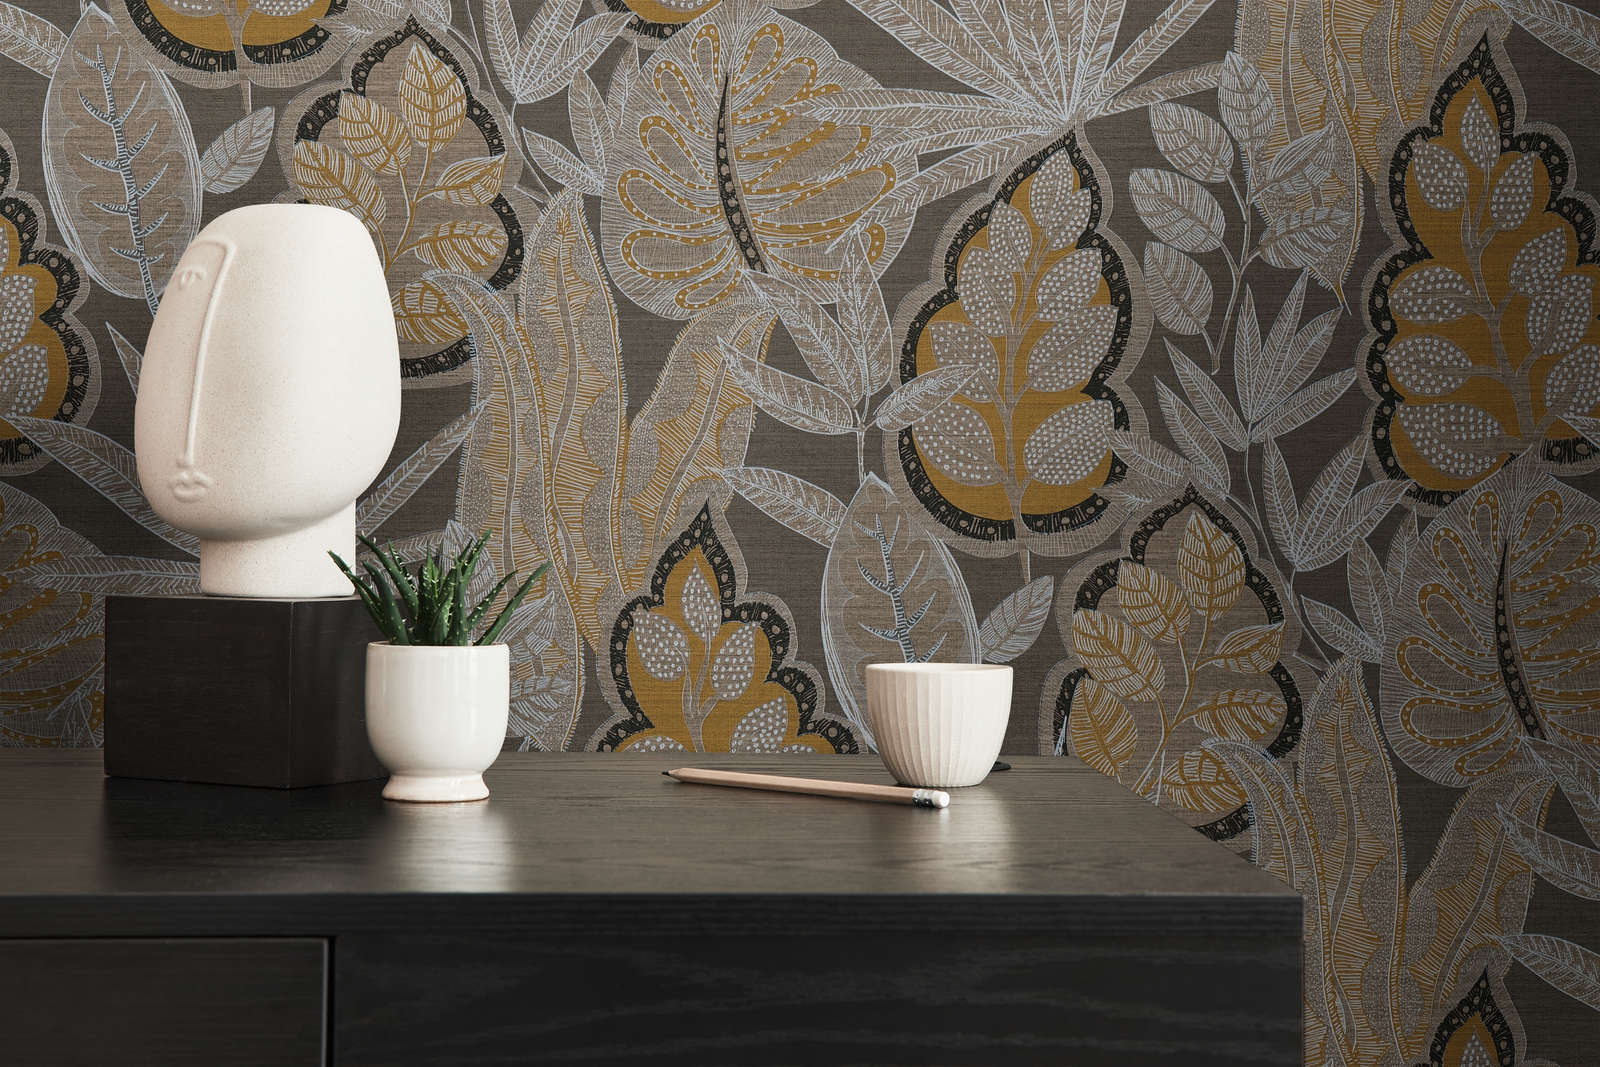             Floral wallpaper in graphic style with light structure, matt - brown, orange, white
        